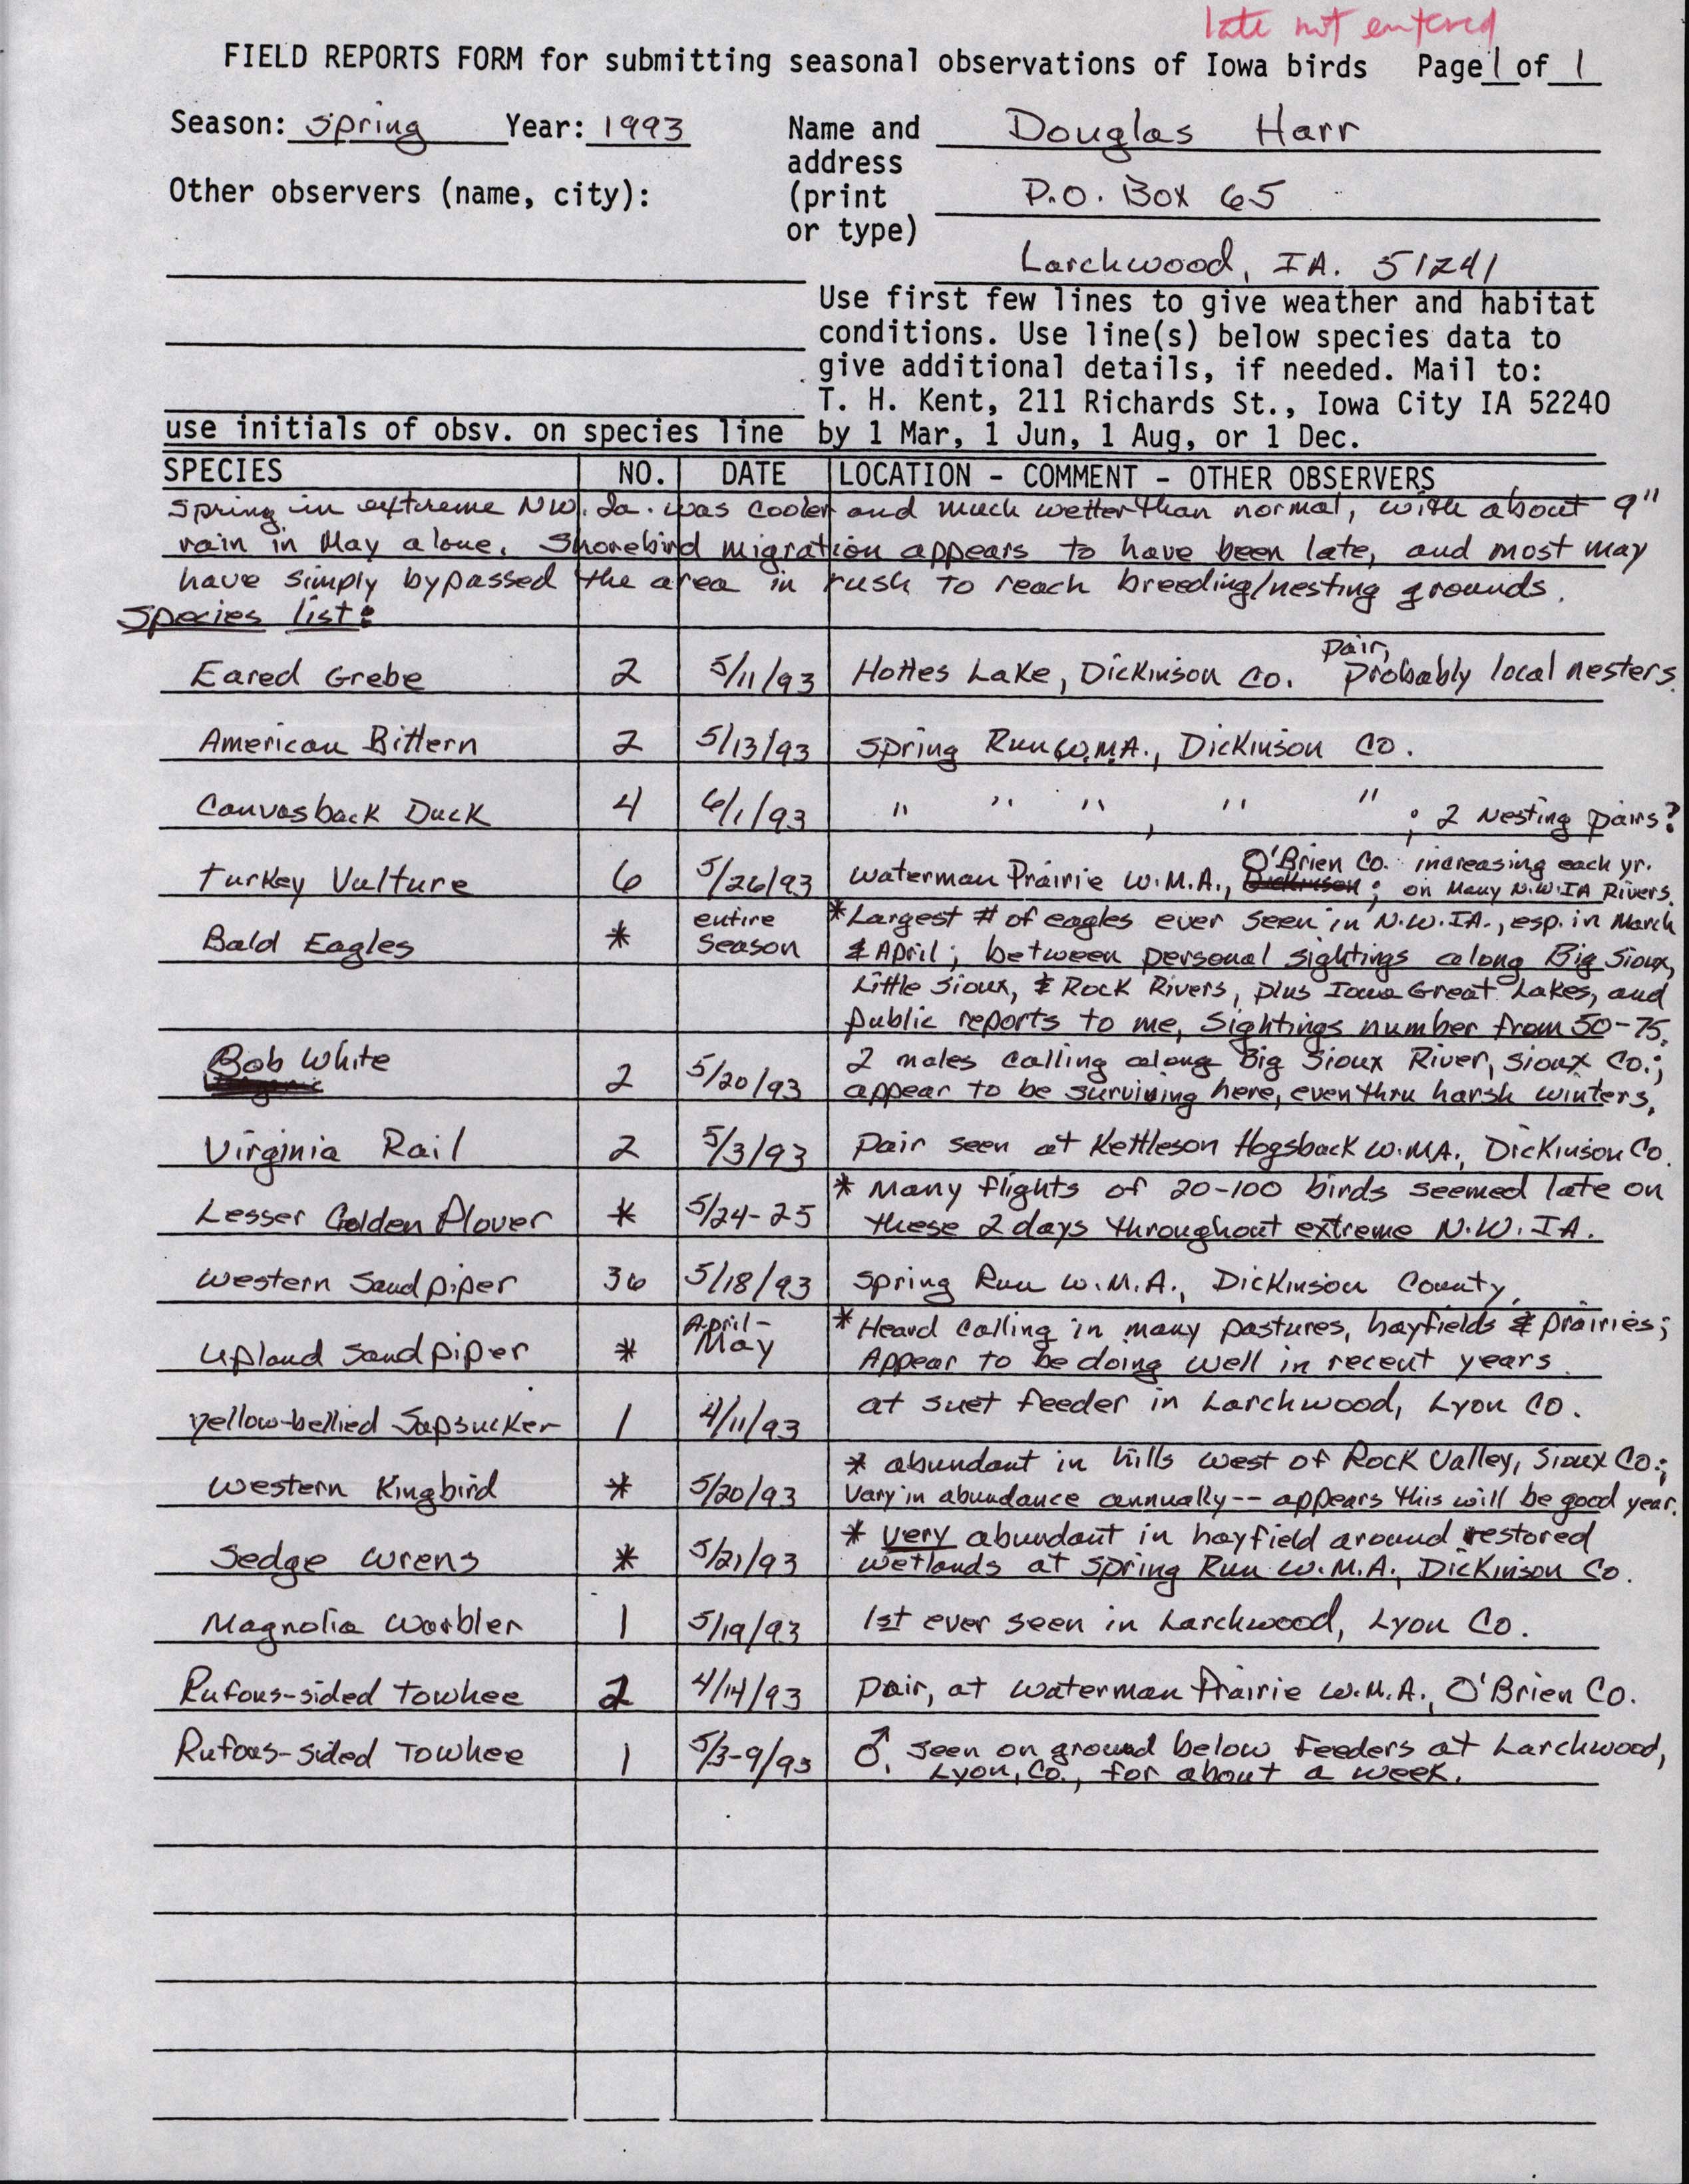 Field reports form for submitting seasonal observations of Iowa birds, Douglas Harr, Spring 1993